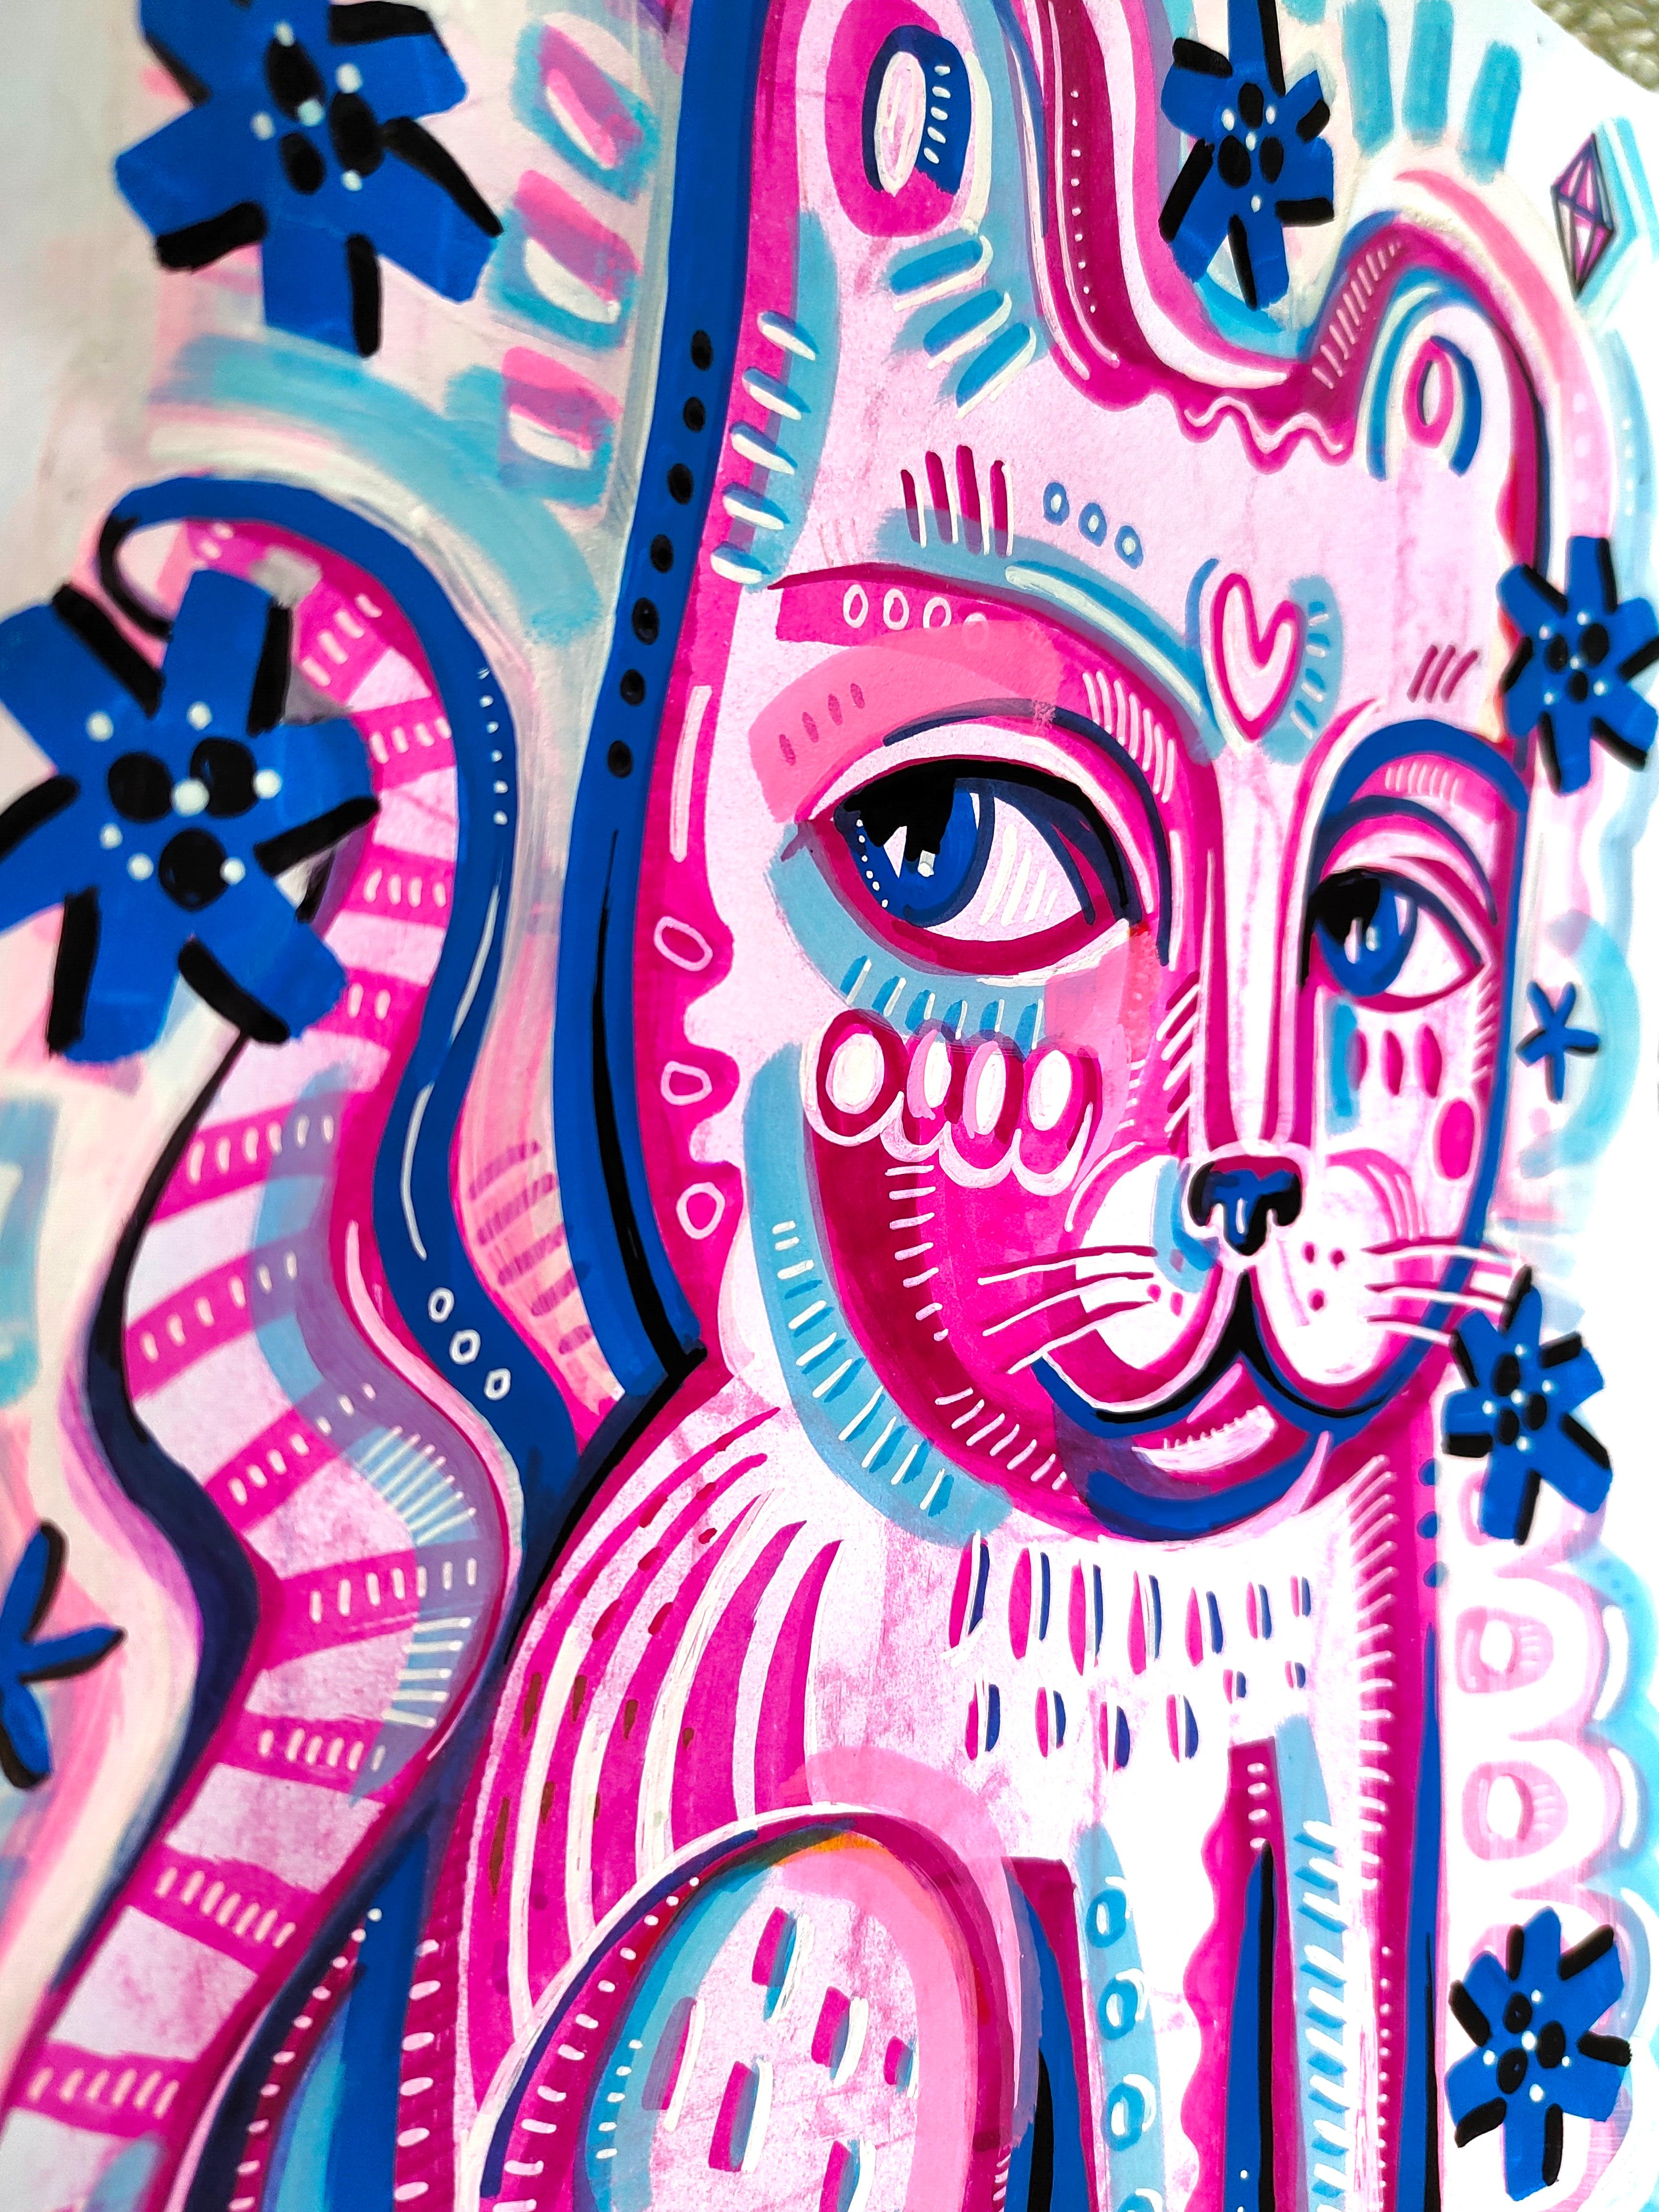 PINK PANTHER - Néo-expressionnisme Painting par Daria Kusto